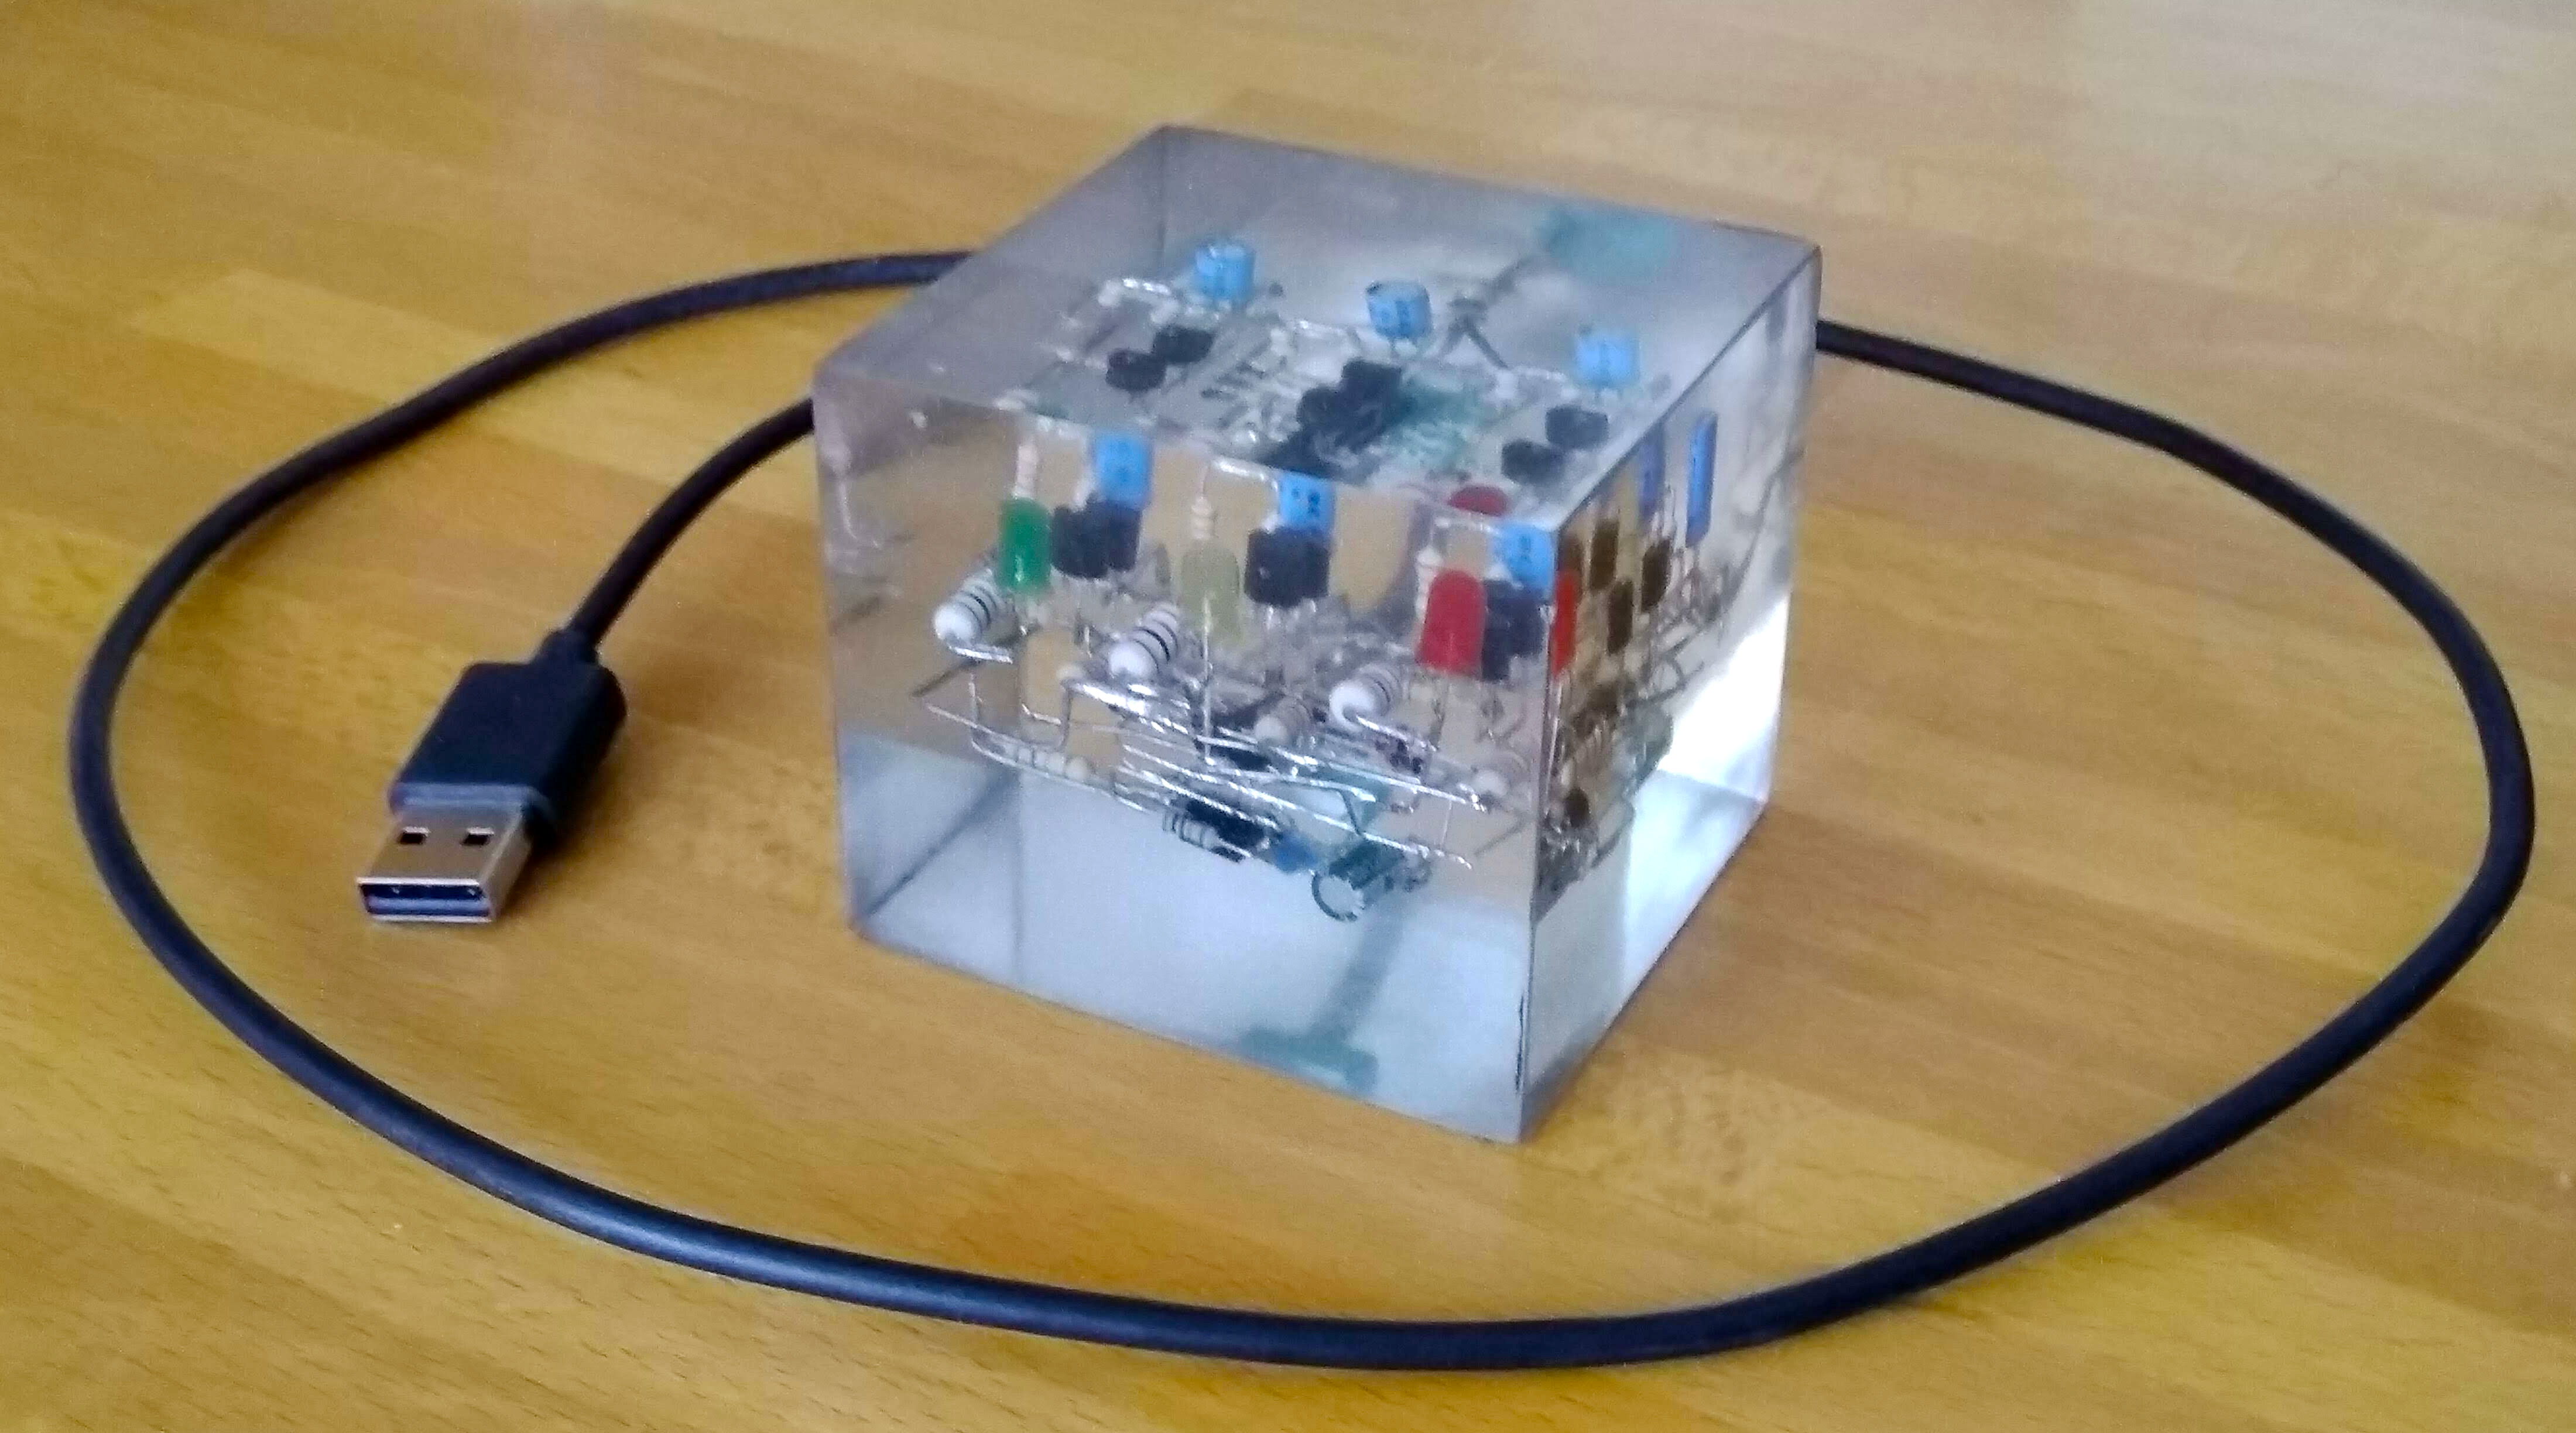 Finished cube with the circuit inside